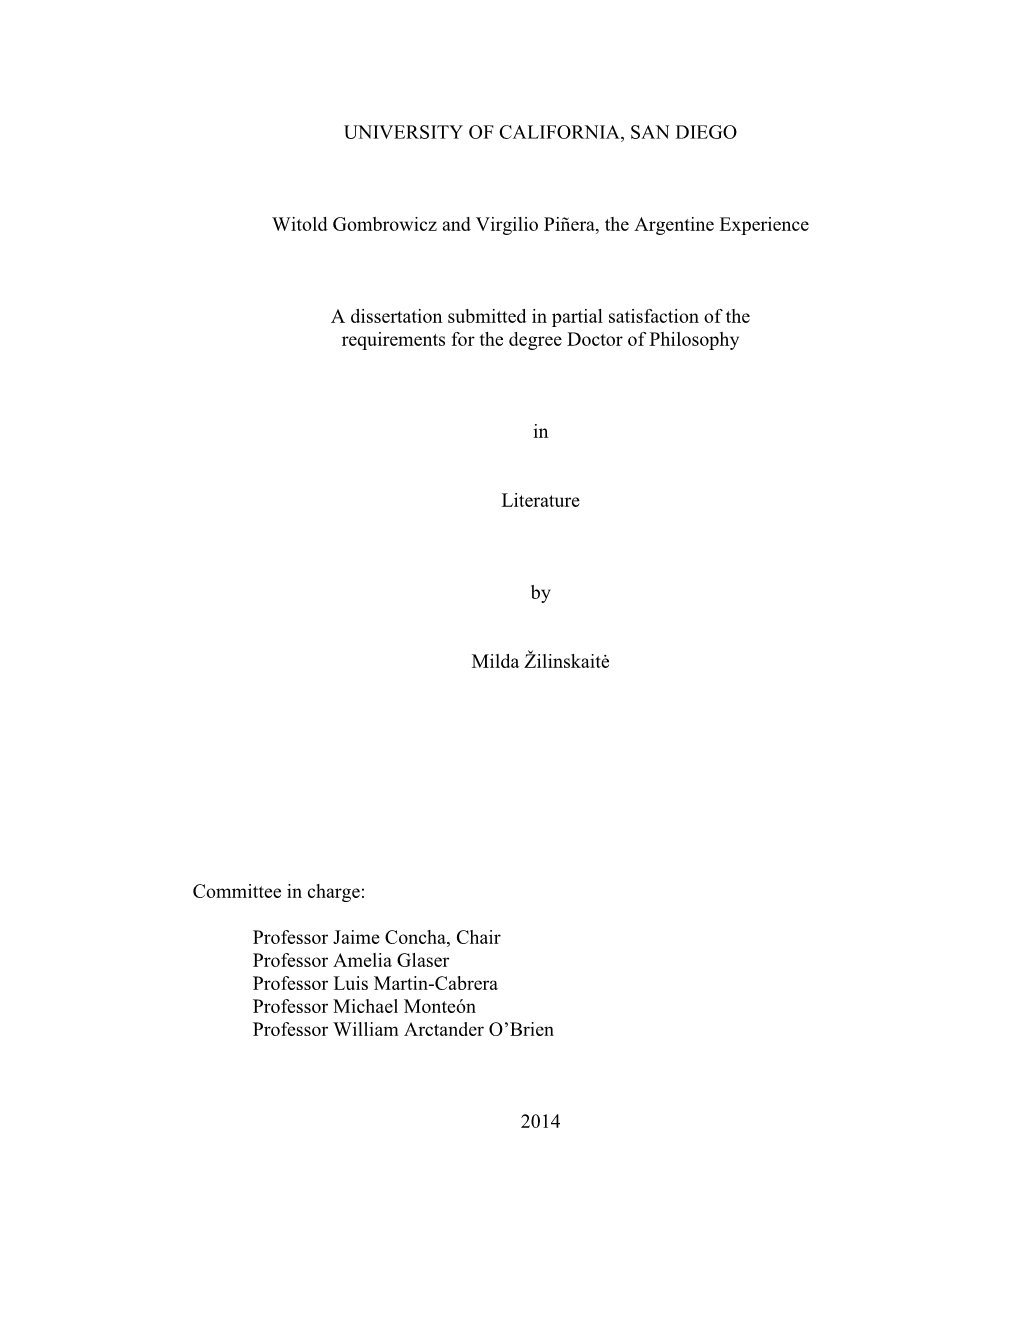 UNIVERSITY of CALIFORNIA, SAN DIEGO Witold Gombrowicz and Virgilio Piñera, the Argentine Experience a Dissertation Submitted In